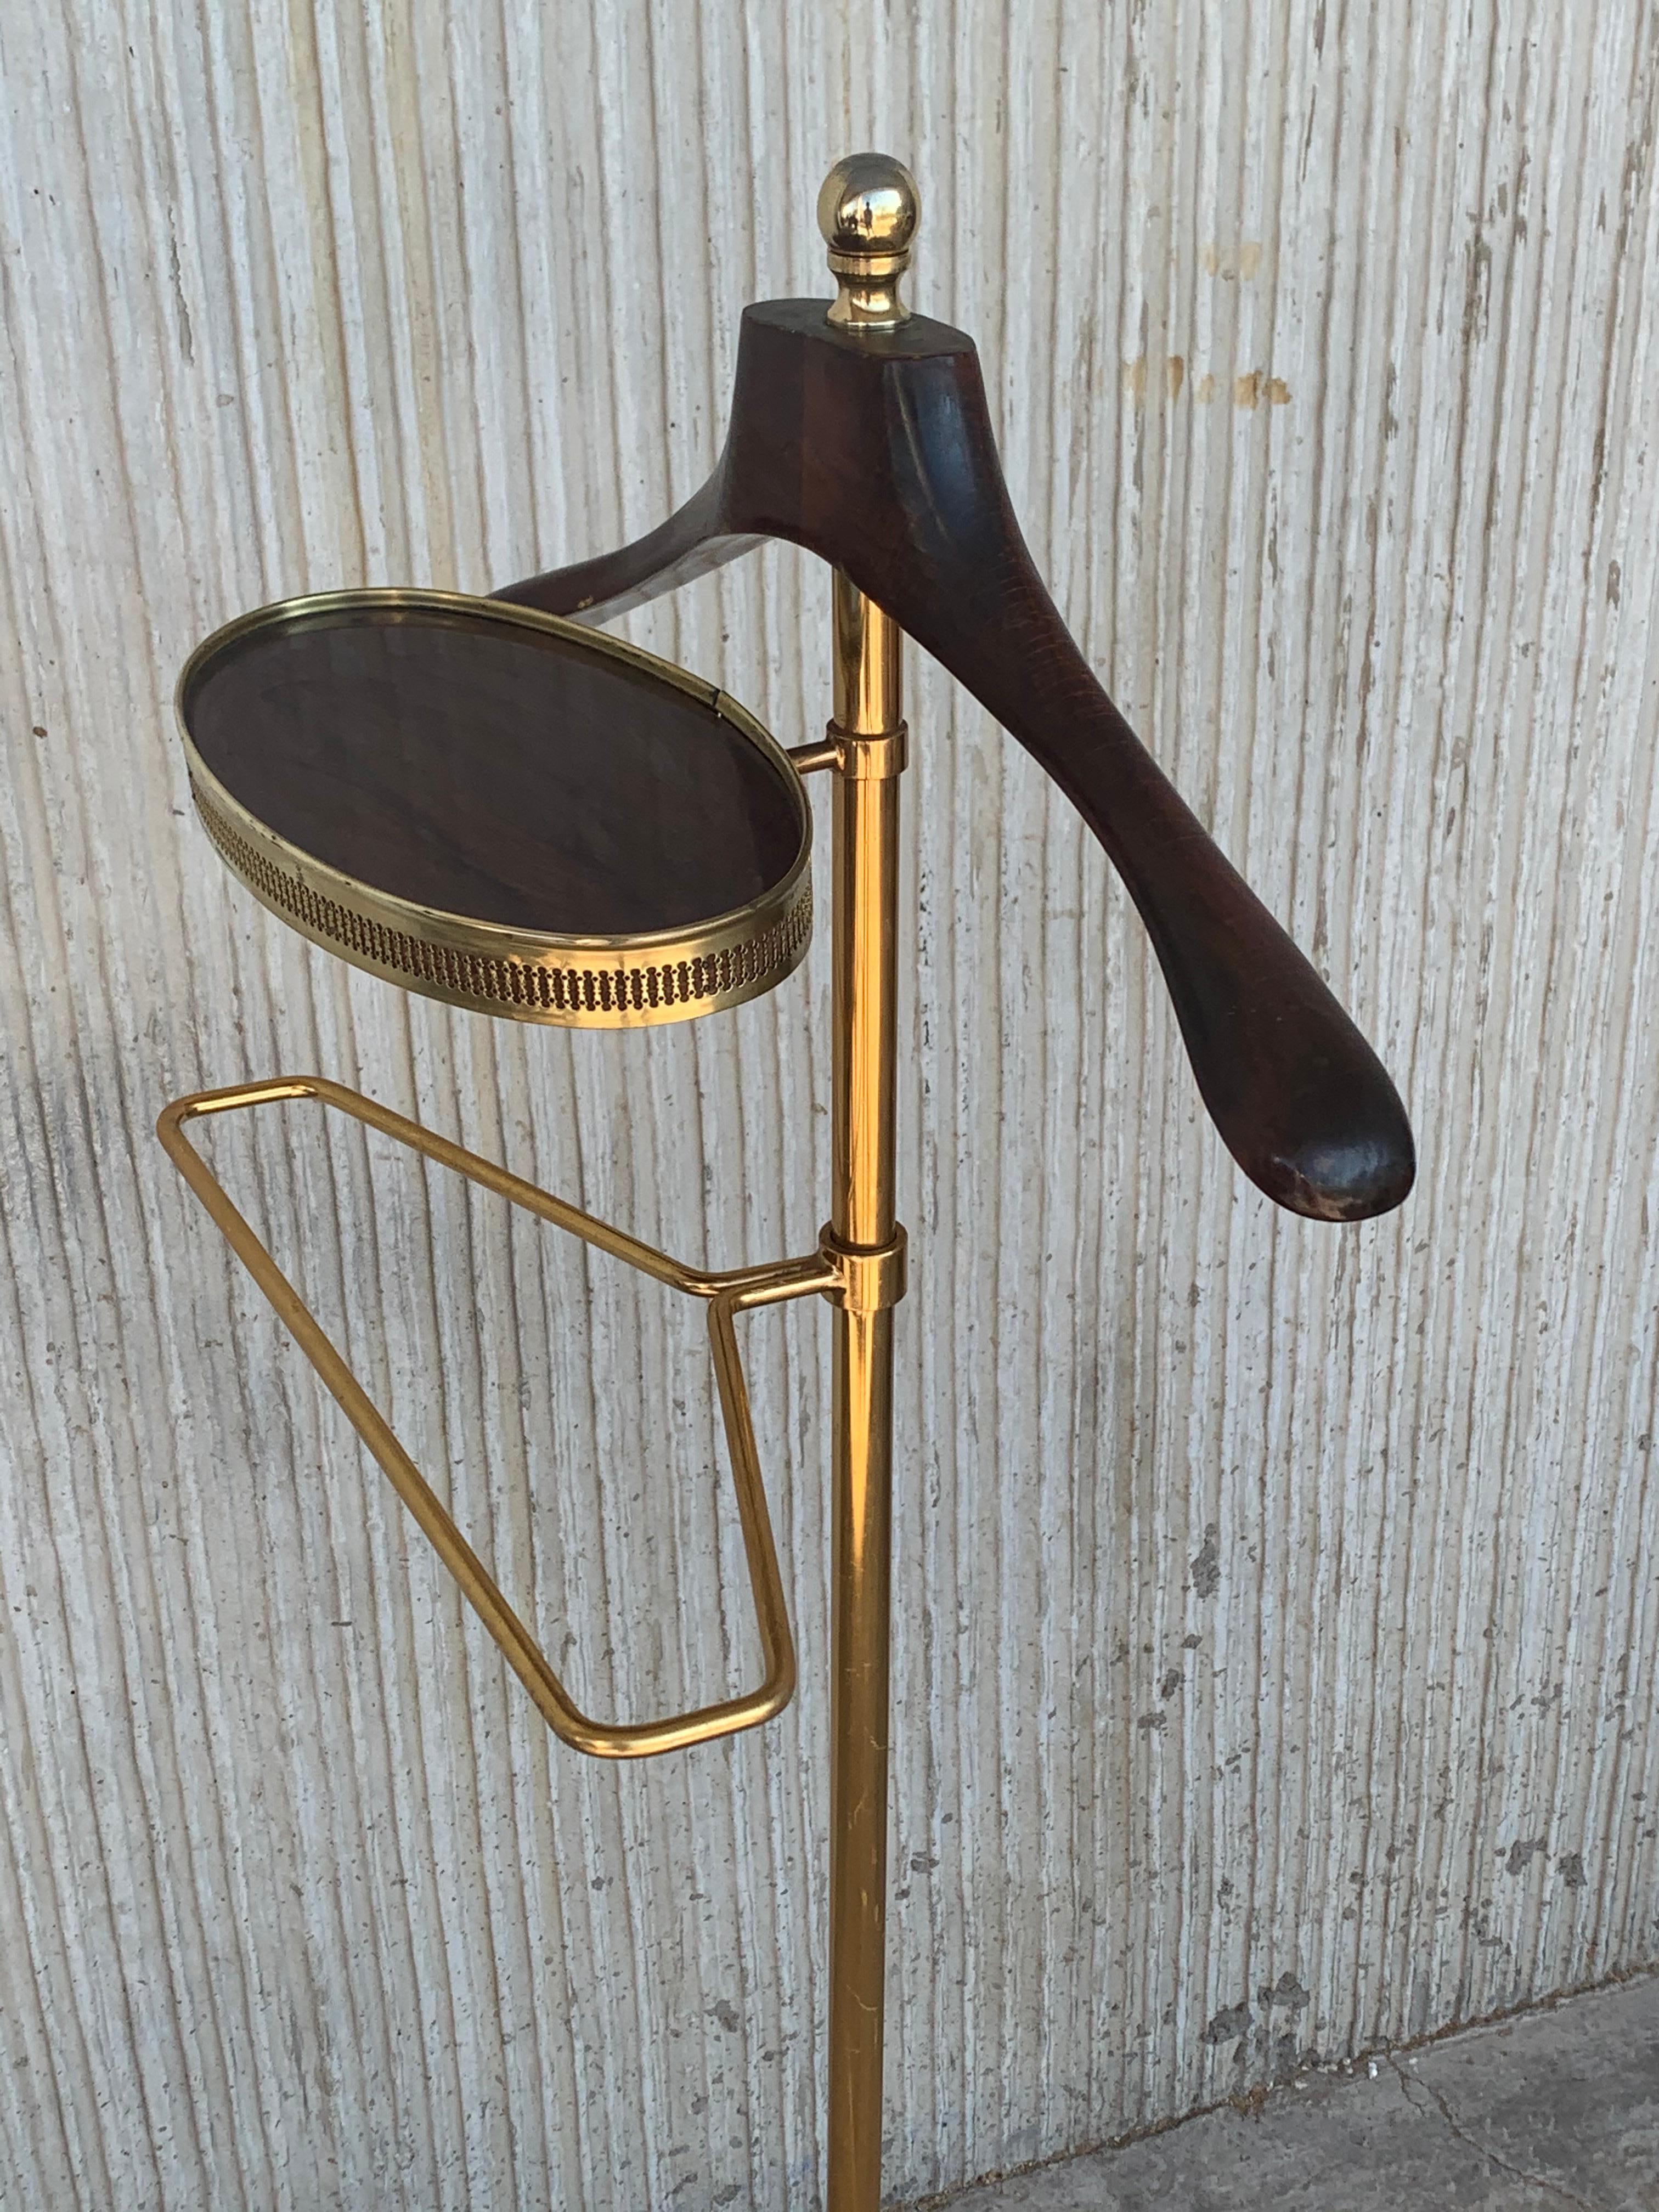 20th Century 1970s Italian Hollywood Regency Brass and Wood Valet Stand Dressboy